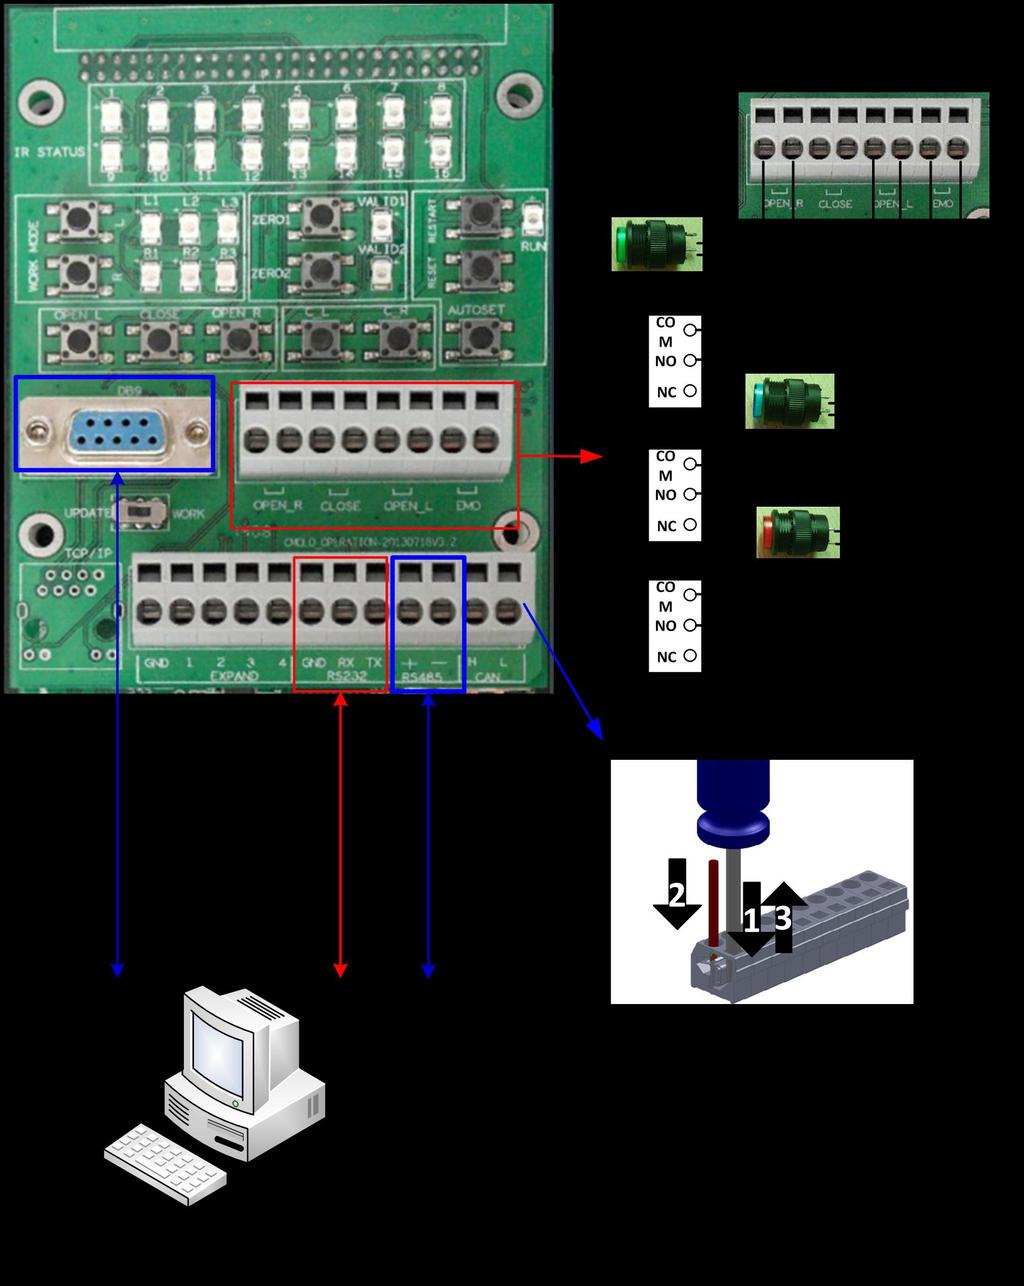 Figure B5 The wiring instructions for the external interface of control panel Note: